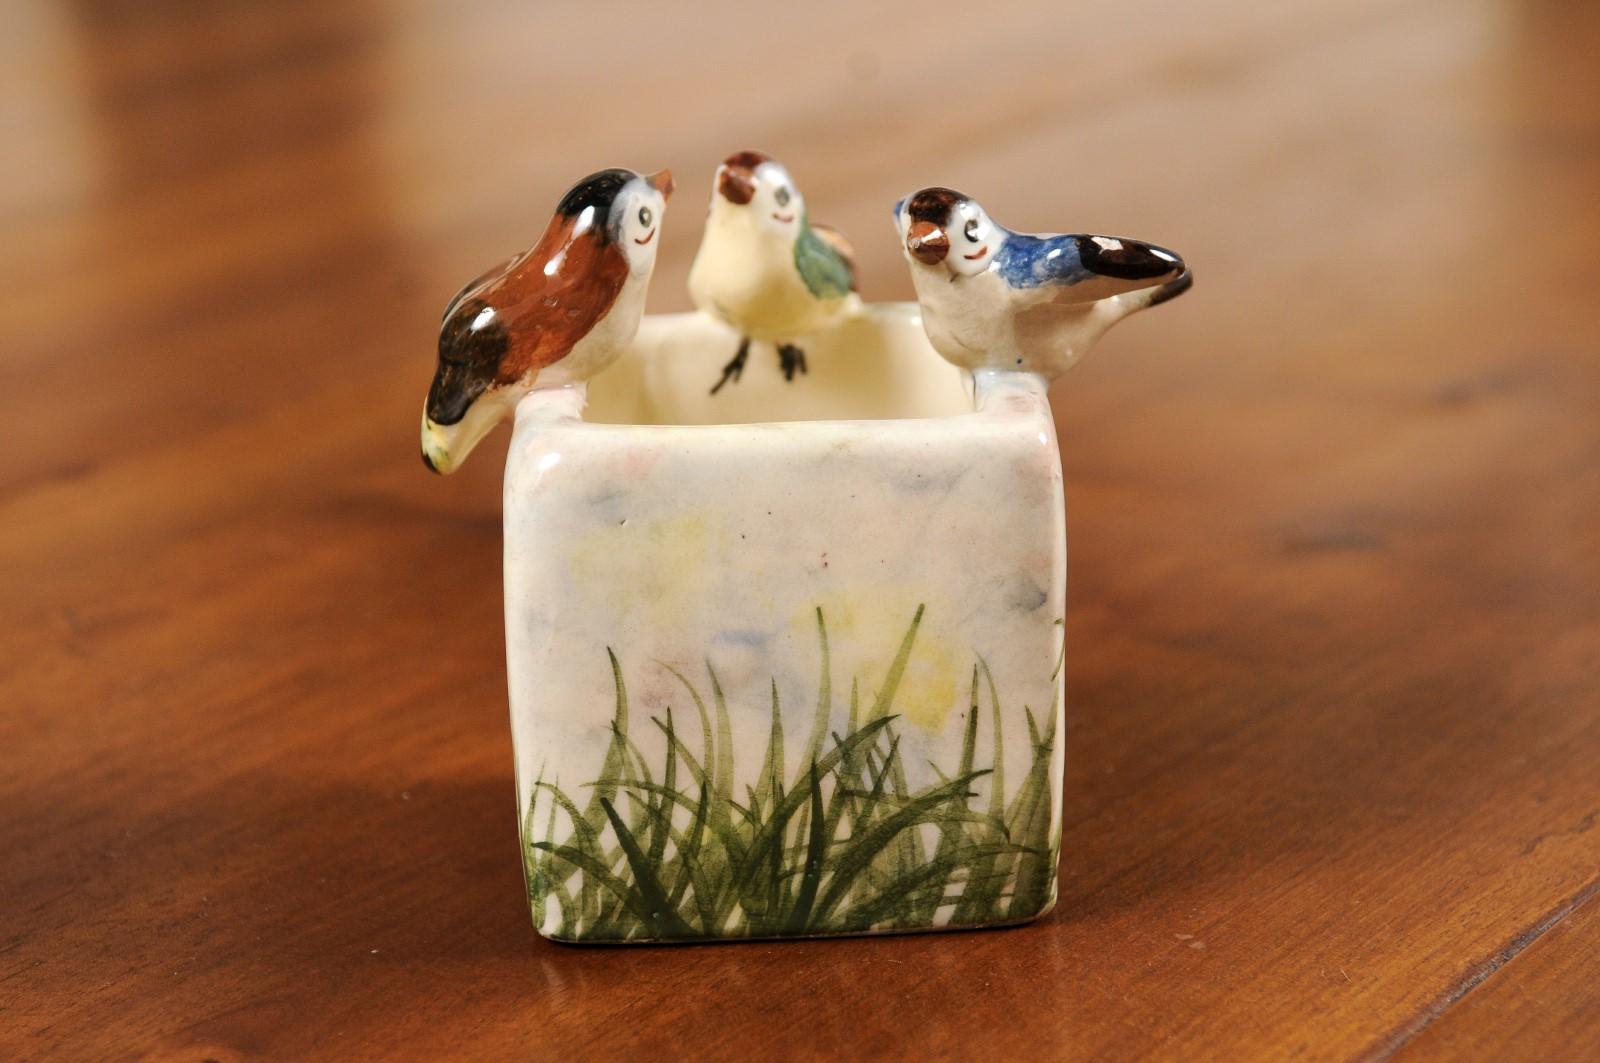 A French majolica decorative container from the 20th century, with three little birds and painted grass. Created in France during the 20th century, this petite container features a rectangular body topped with three lovely birds perched on the edge